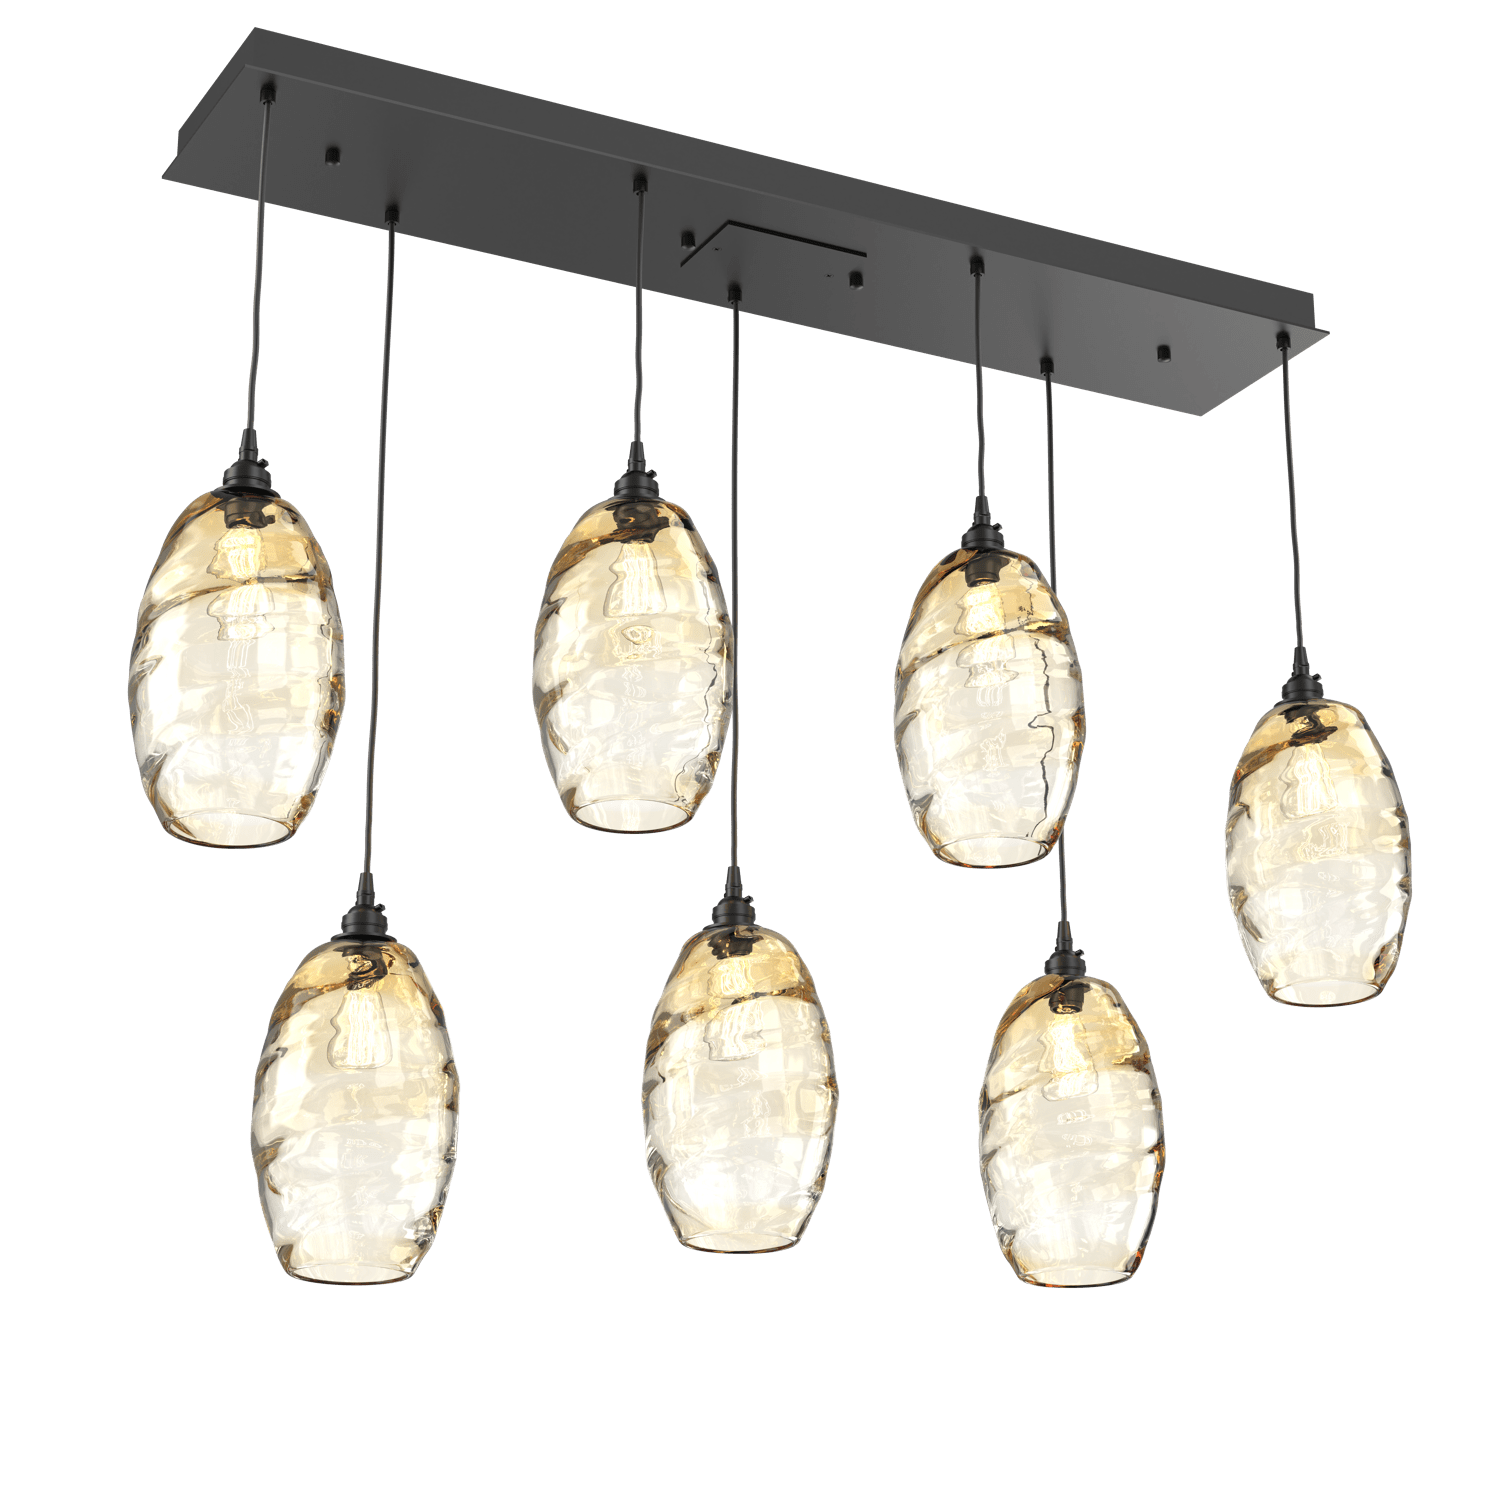 PLB0035-07-MB-OA-Hammerton-Studio-Optic-Blown-Glass-Elisse-7-light-linear-pendant-chandelier-with-matte-black-finish-and-optic-amber-blown-glass-shades-and-incandescent-lamping